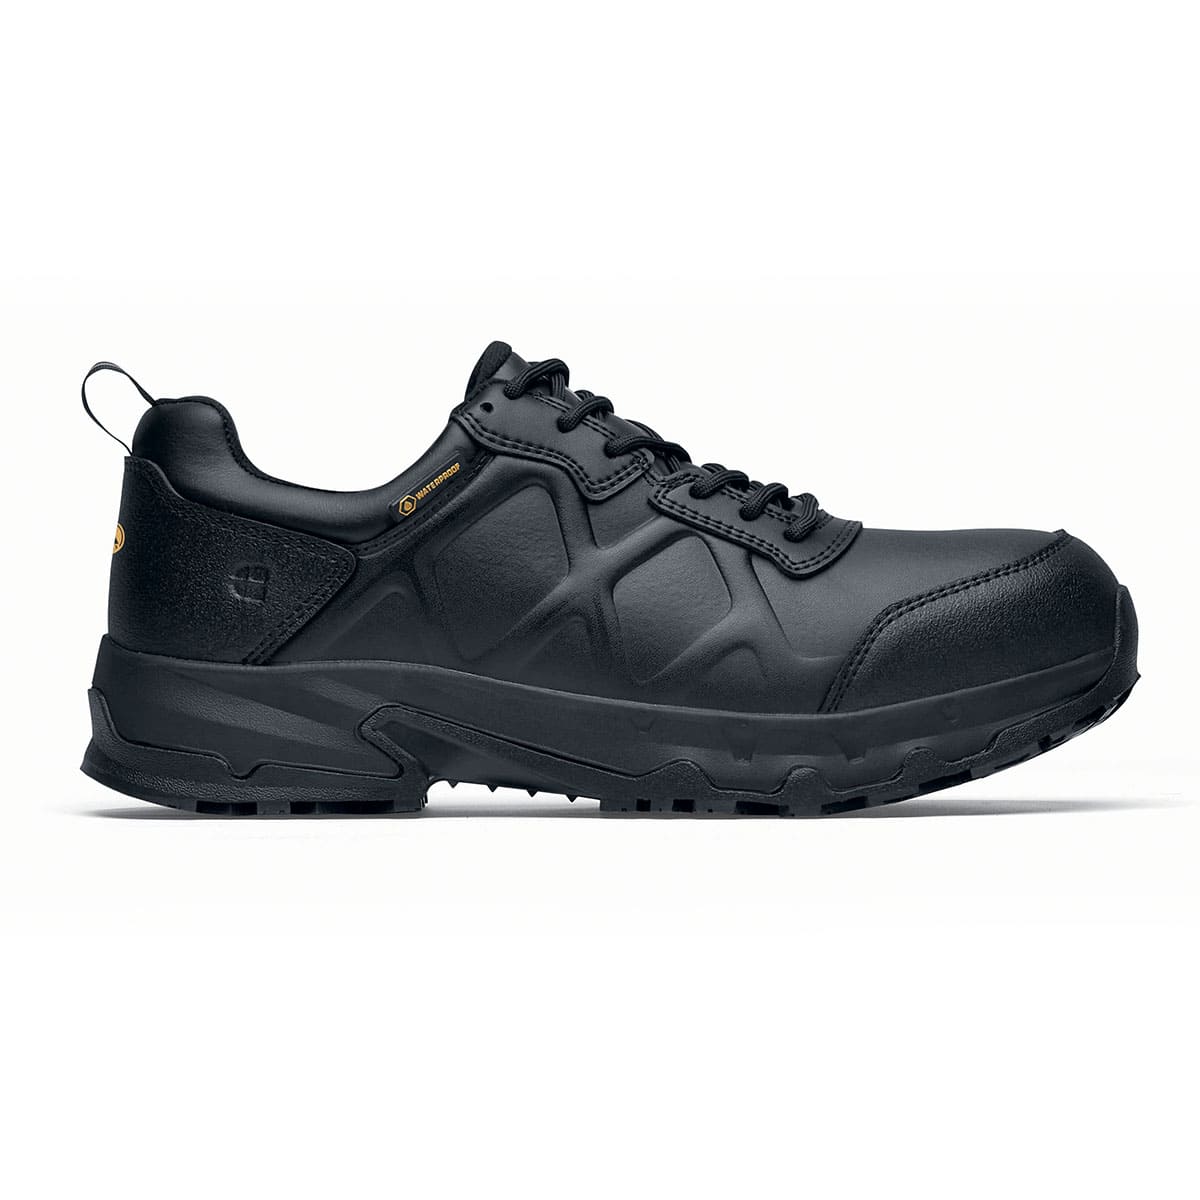 The Callan low-cut shoe is slip-resistant and has a breathable, waterproof upper as well as insulation for cold and heat, seen from the right